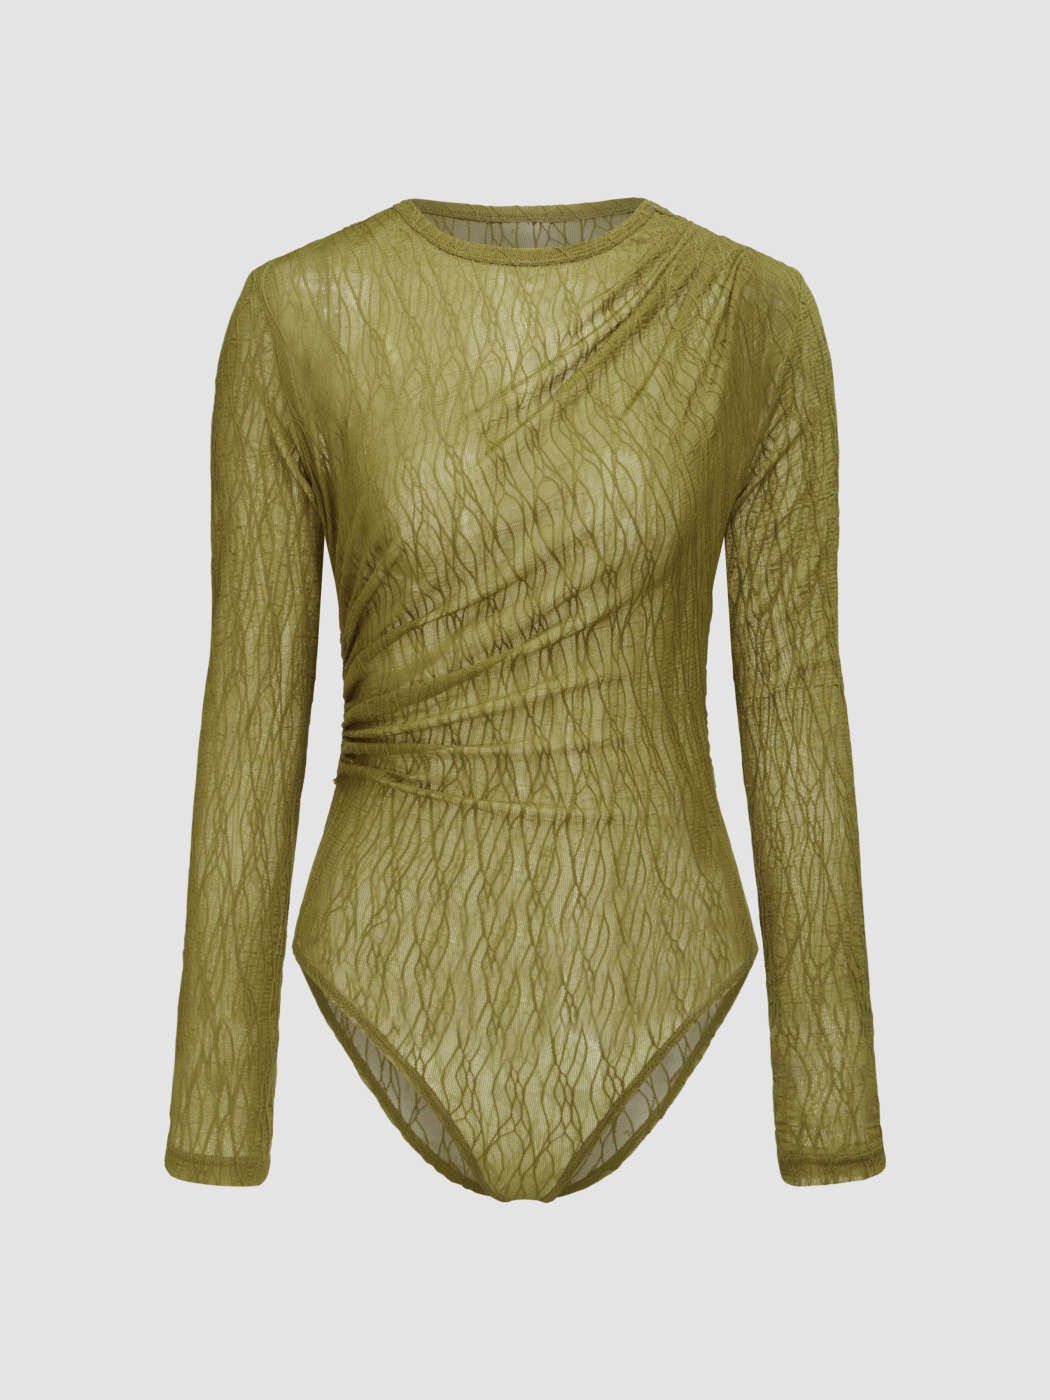 Buy Solid Bodysuit with Mesh Sleeves and Crew Neck